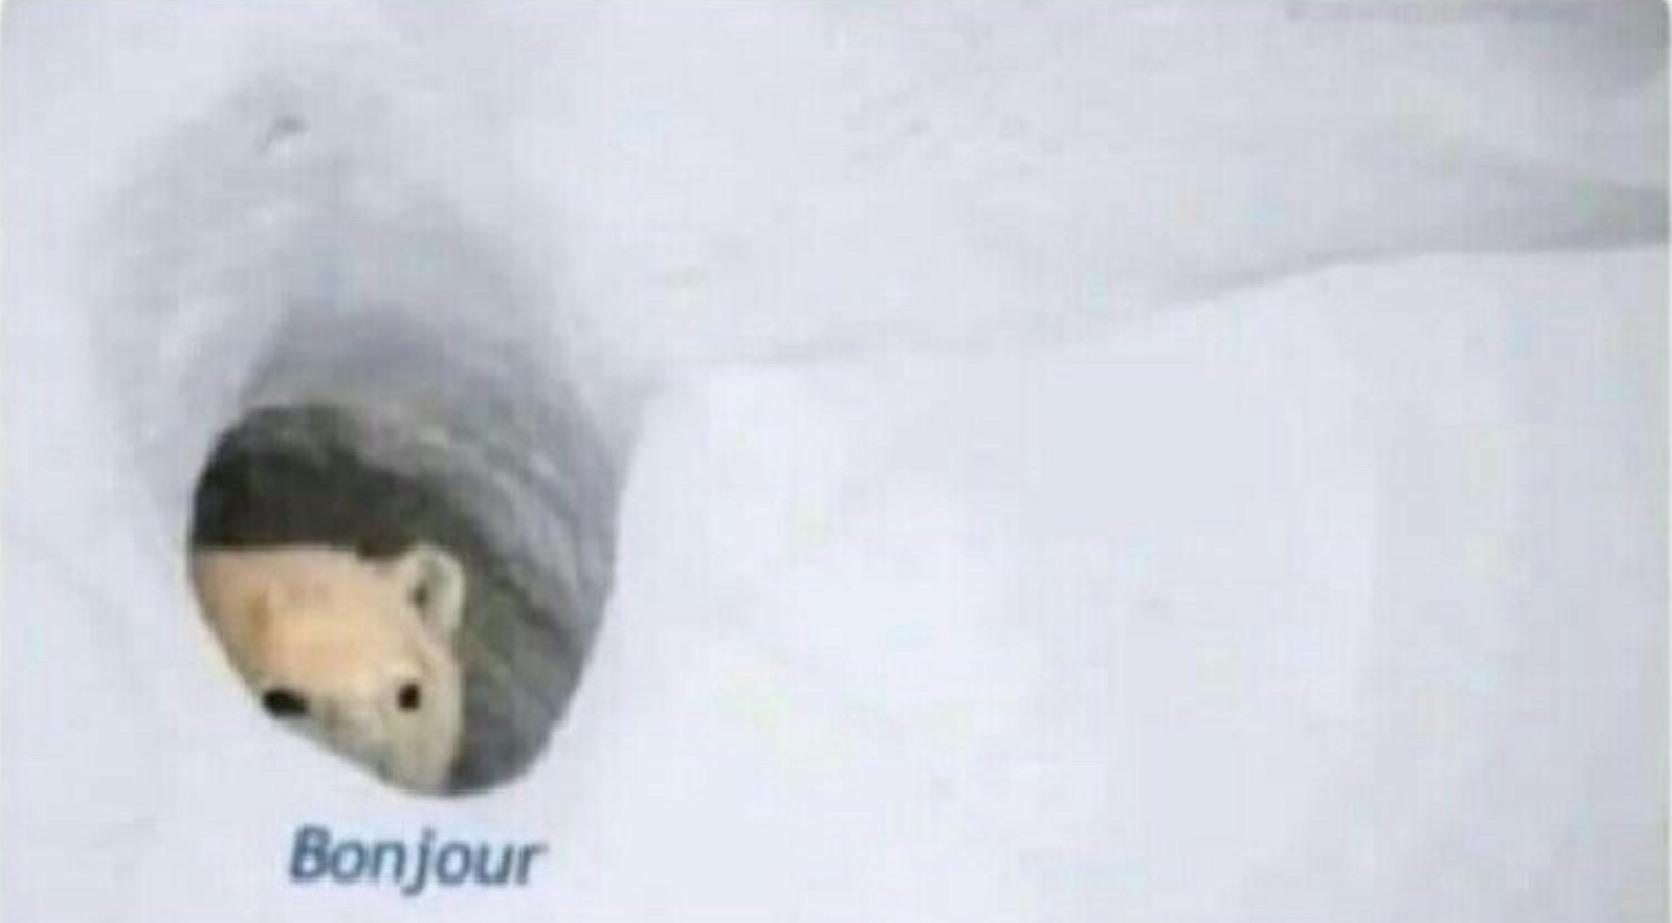 A polar bear peeking out of a hole in the snow with the caption 'bonjour'.